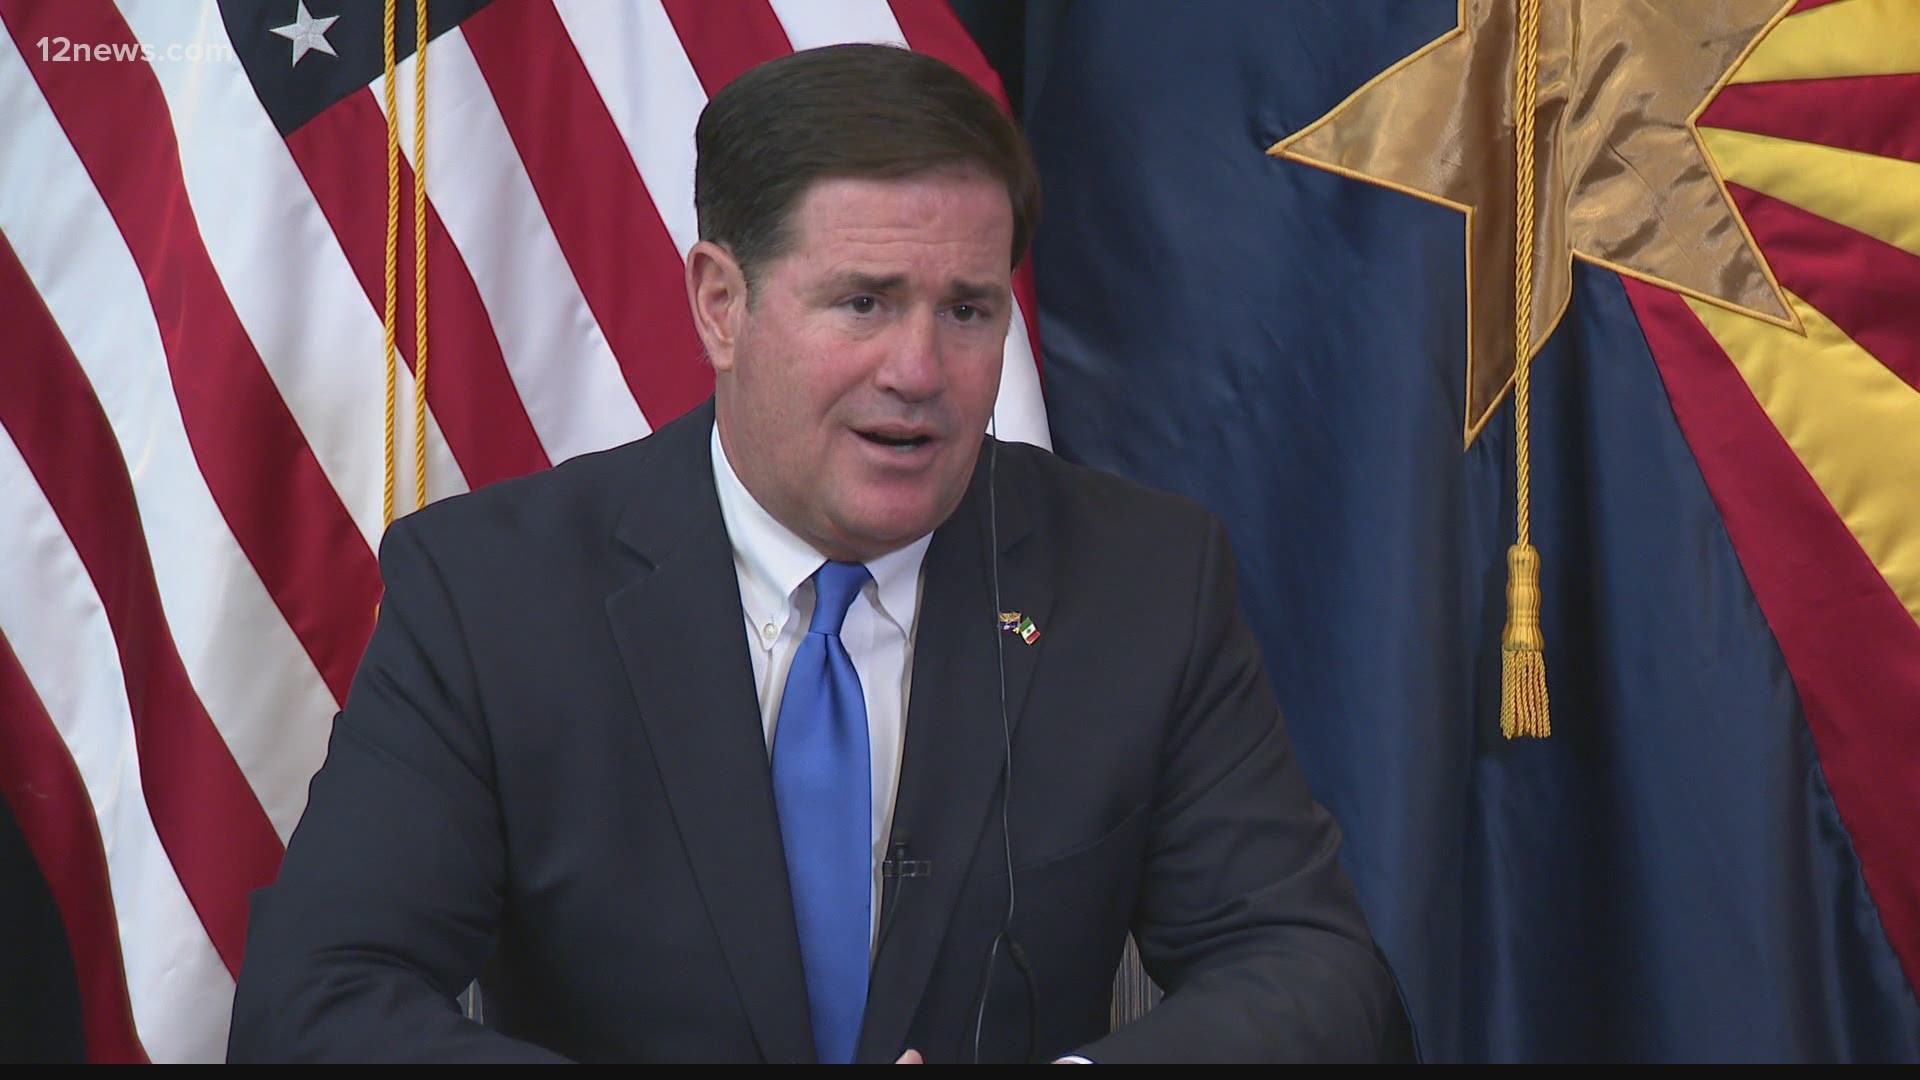 During an interview with 12 News on Tuesday, Governor Ducey was asked about false accusations by former President Trump about Maricopa County's election.